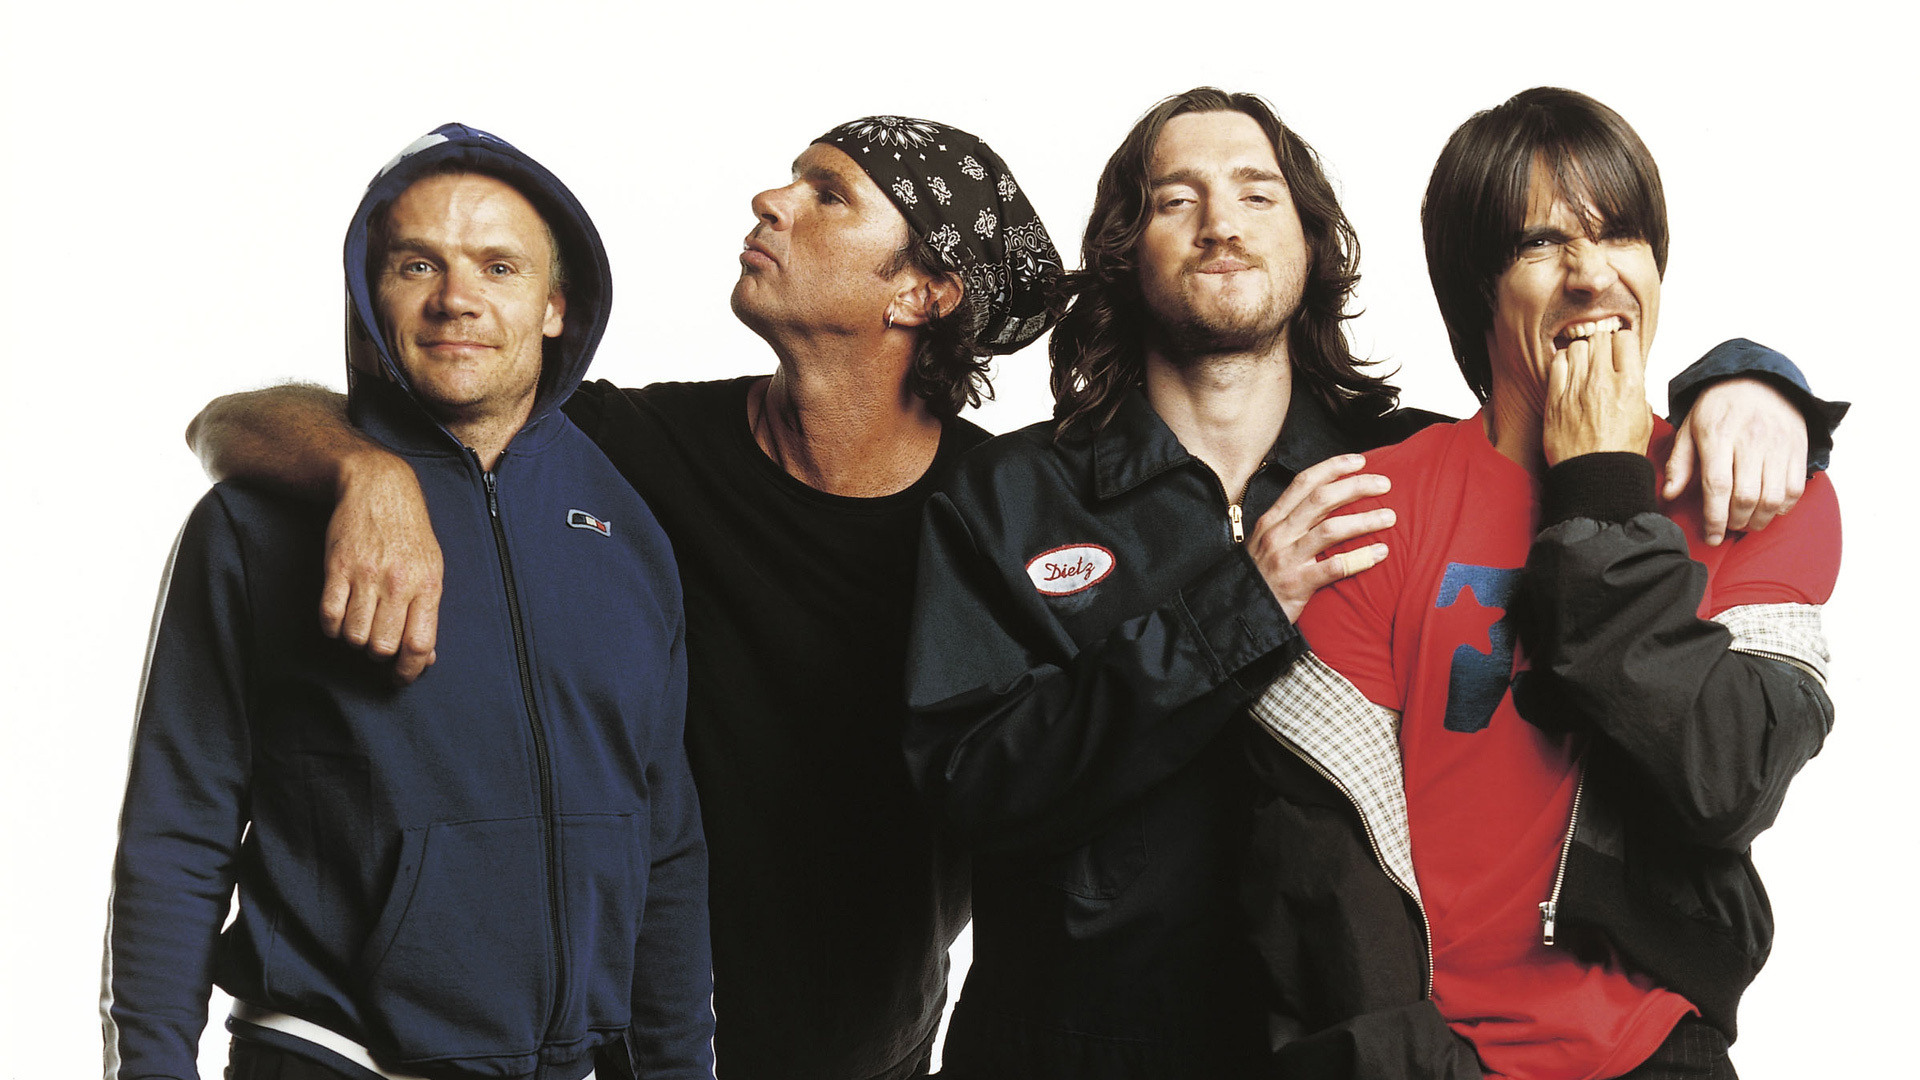 Flea, Red Hot Chili Peppers, HD wallpapers and backgrounds, 1920x1080 Full HD Desktop